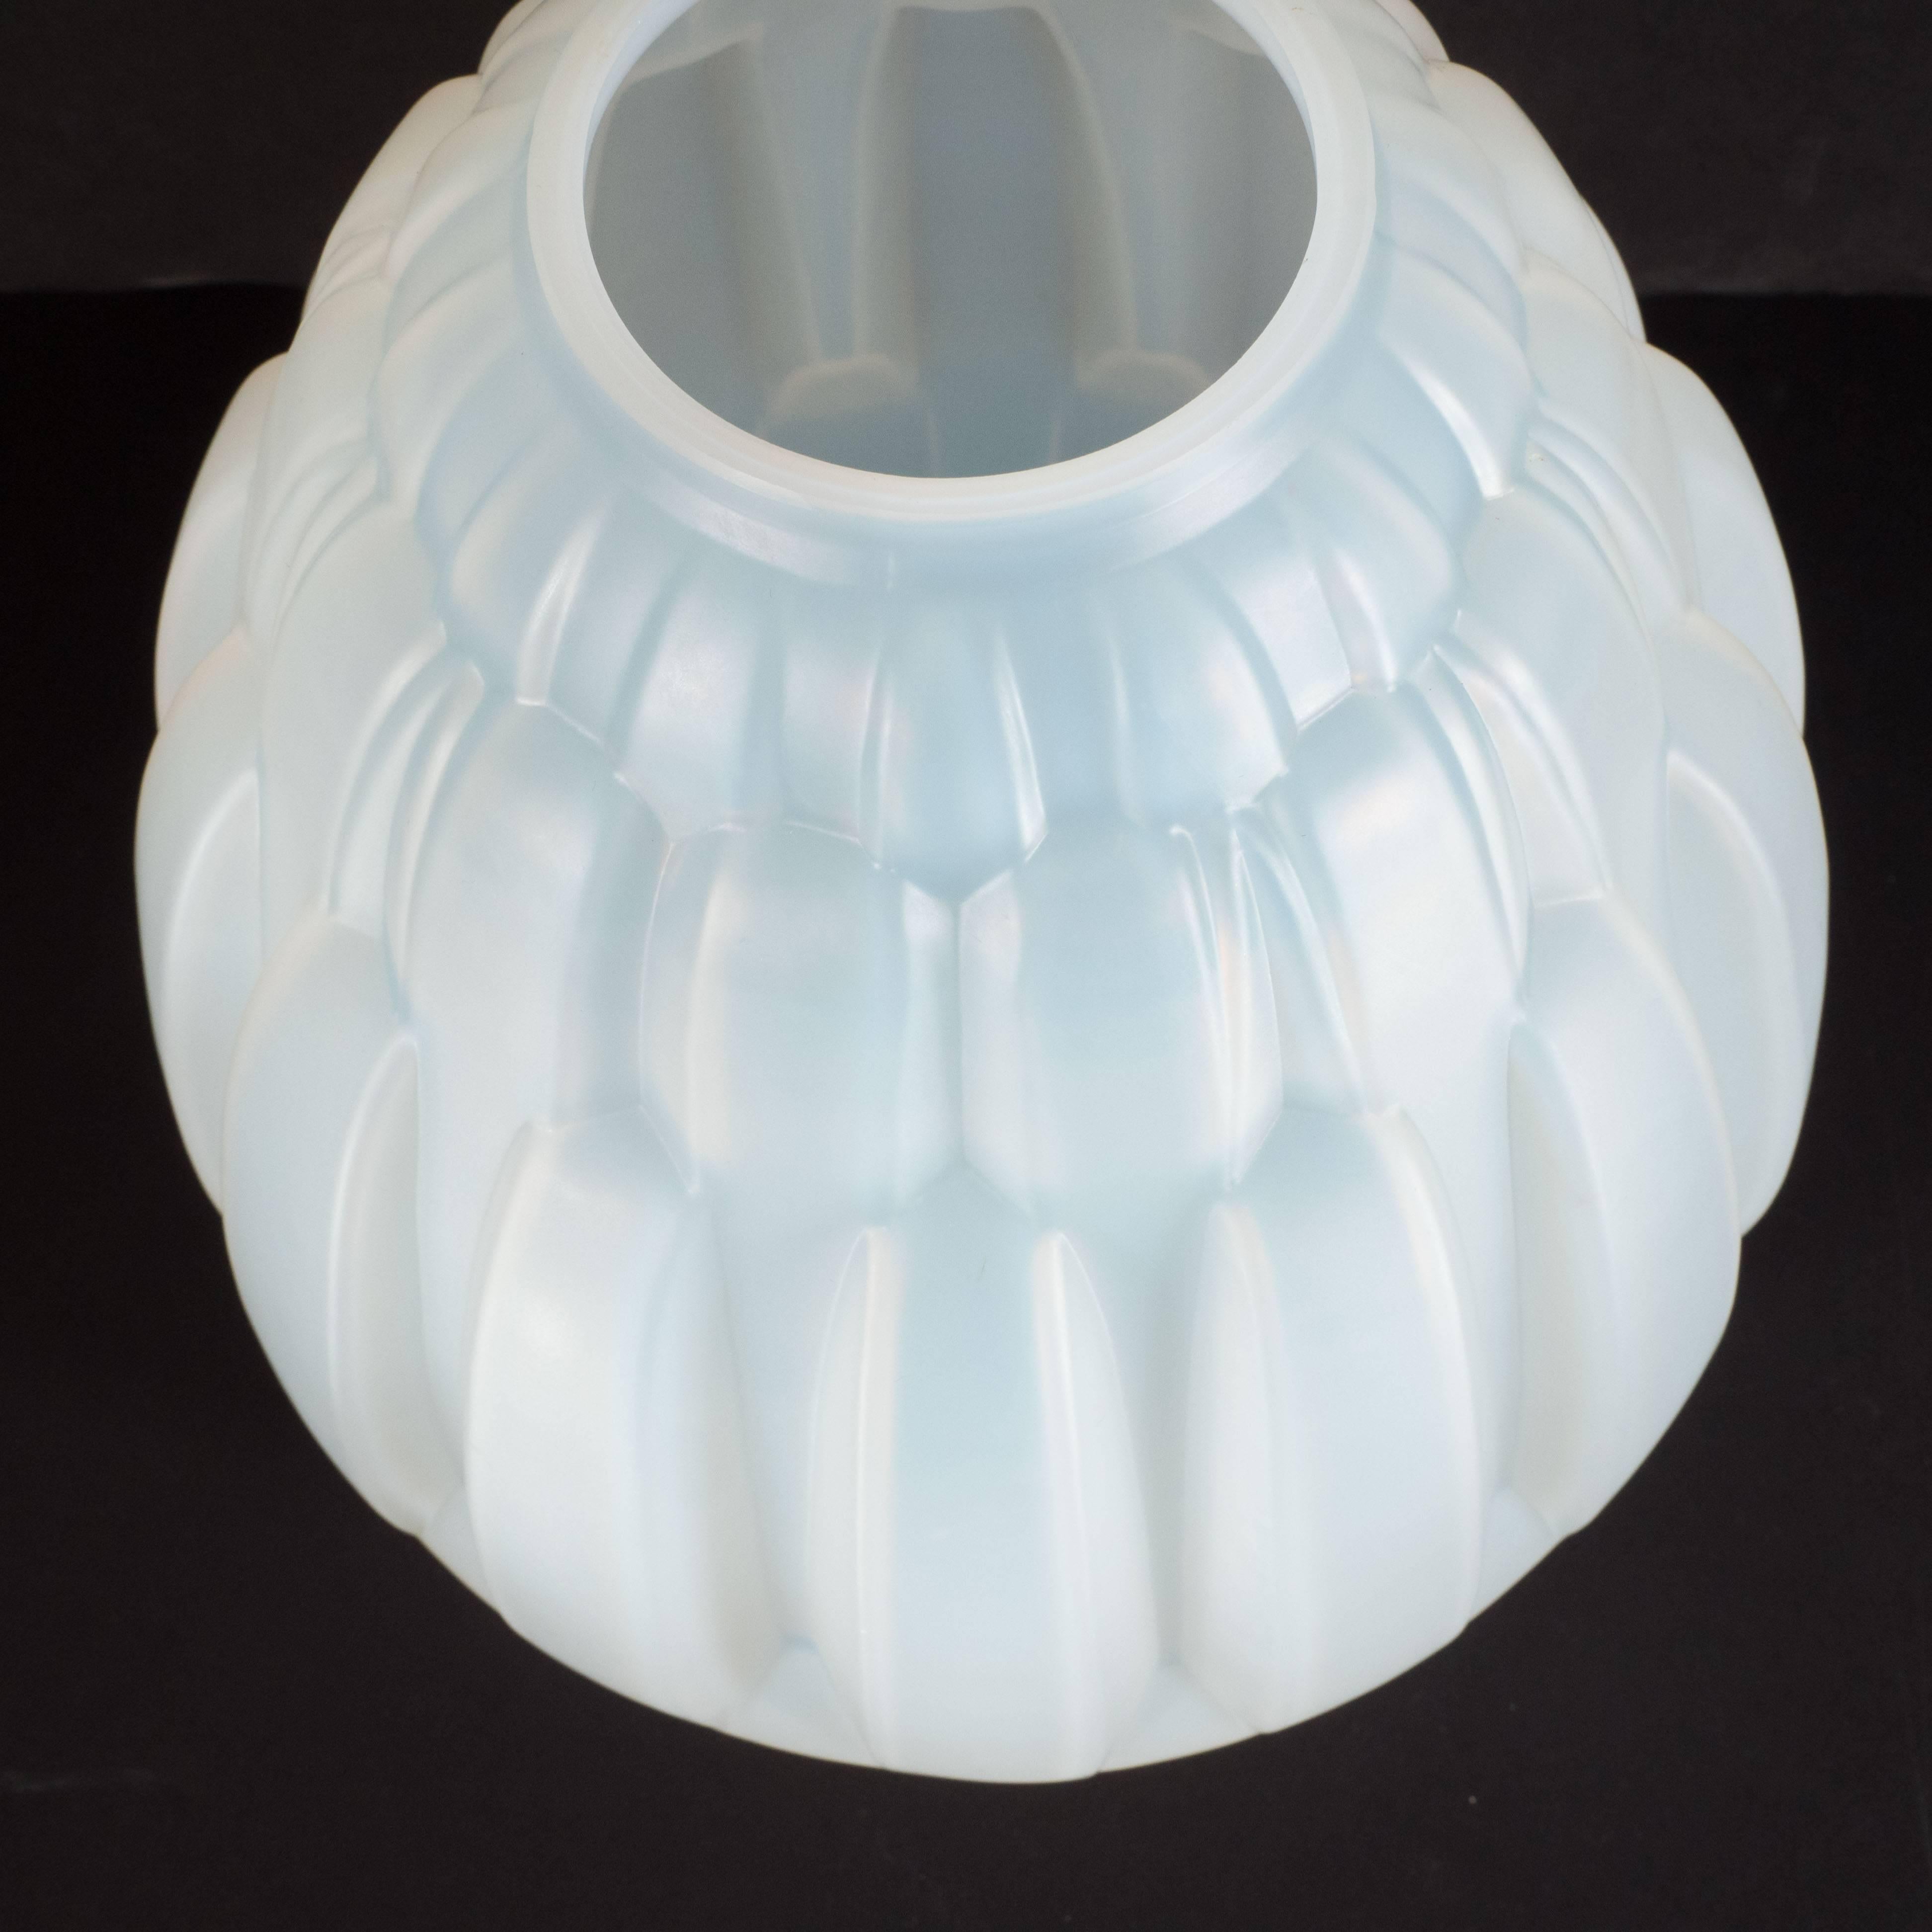 French Art Deco Opalescent Glass Vase with Streamlined Bands by Andre Hunebelle 1